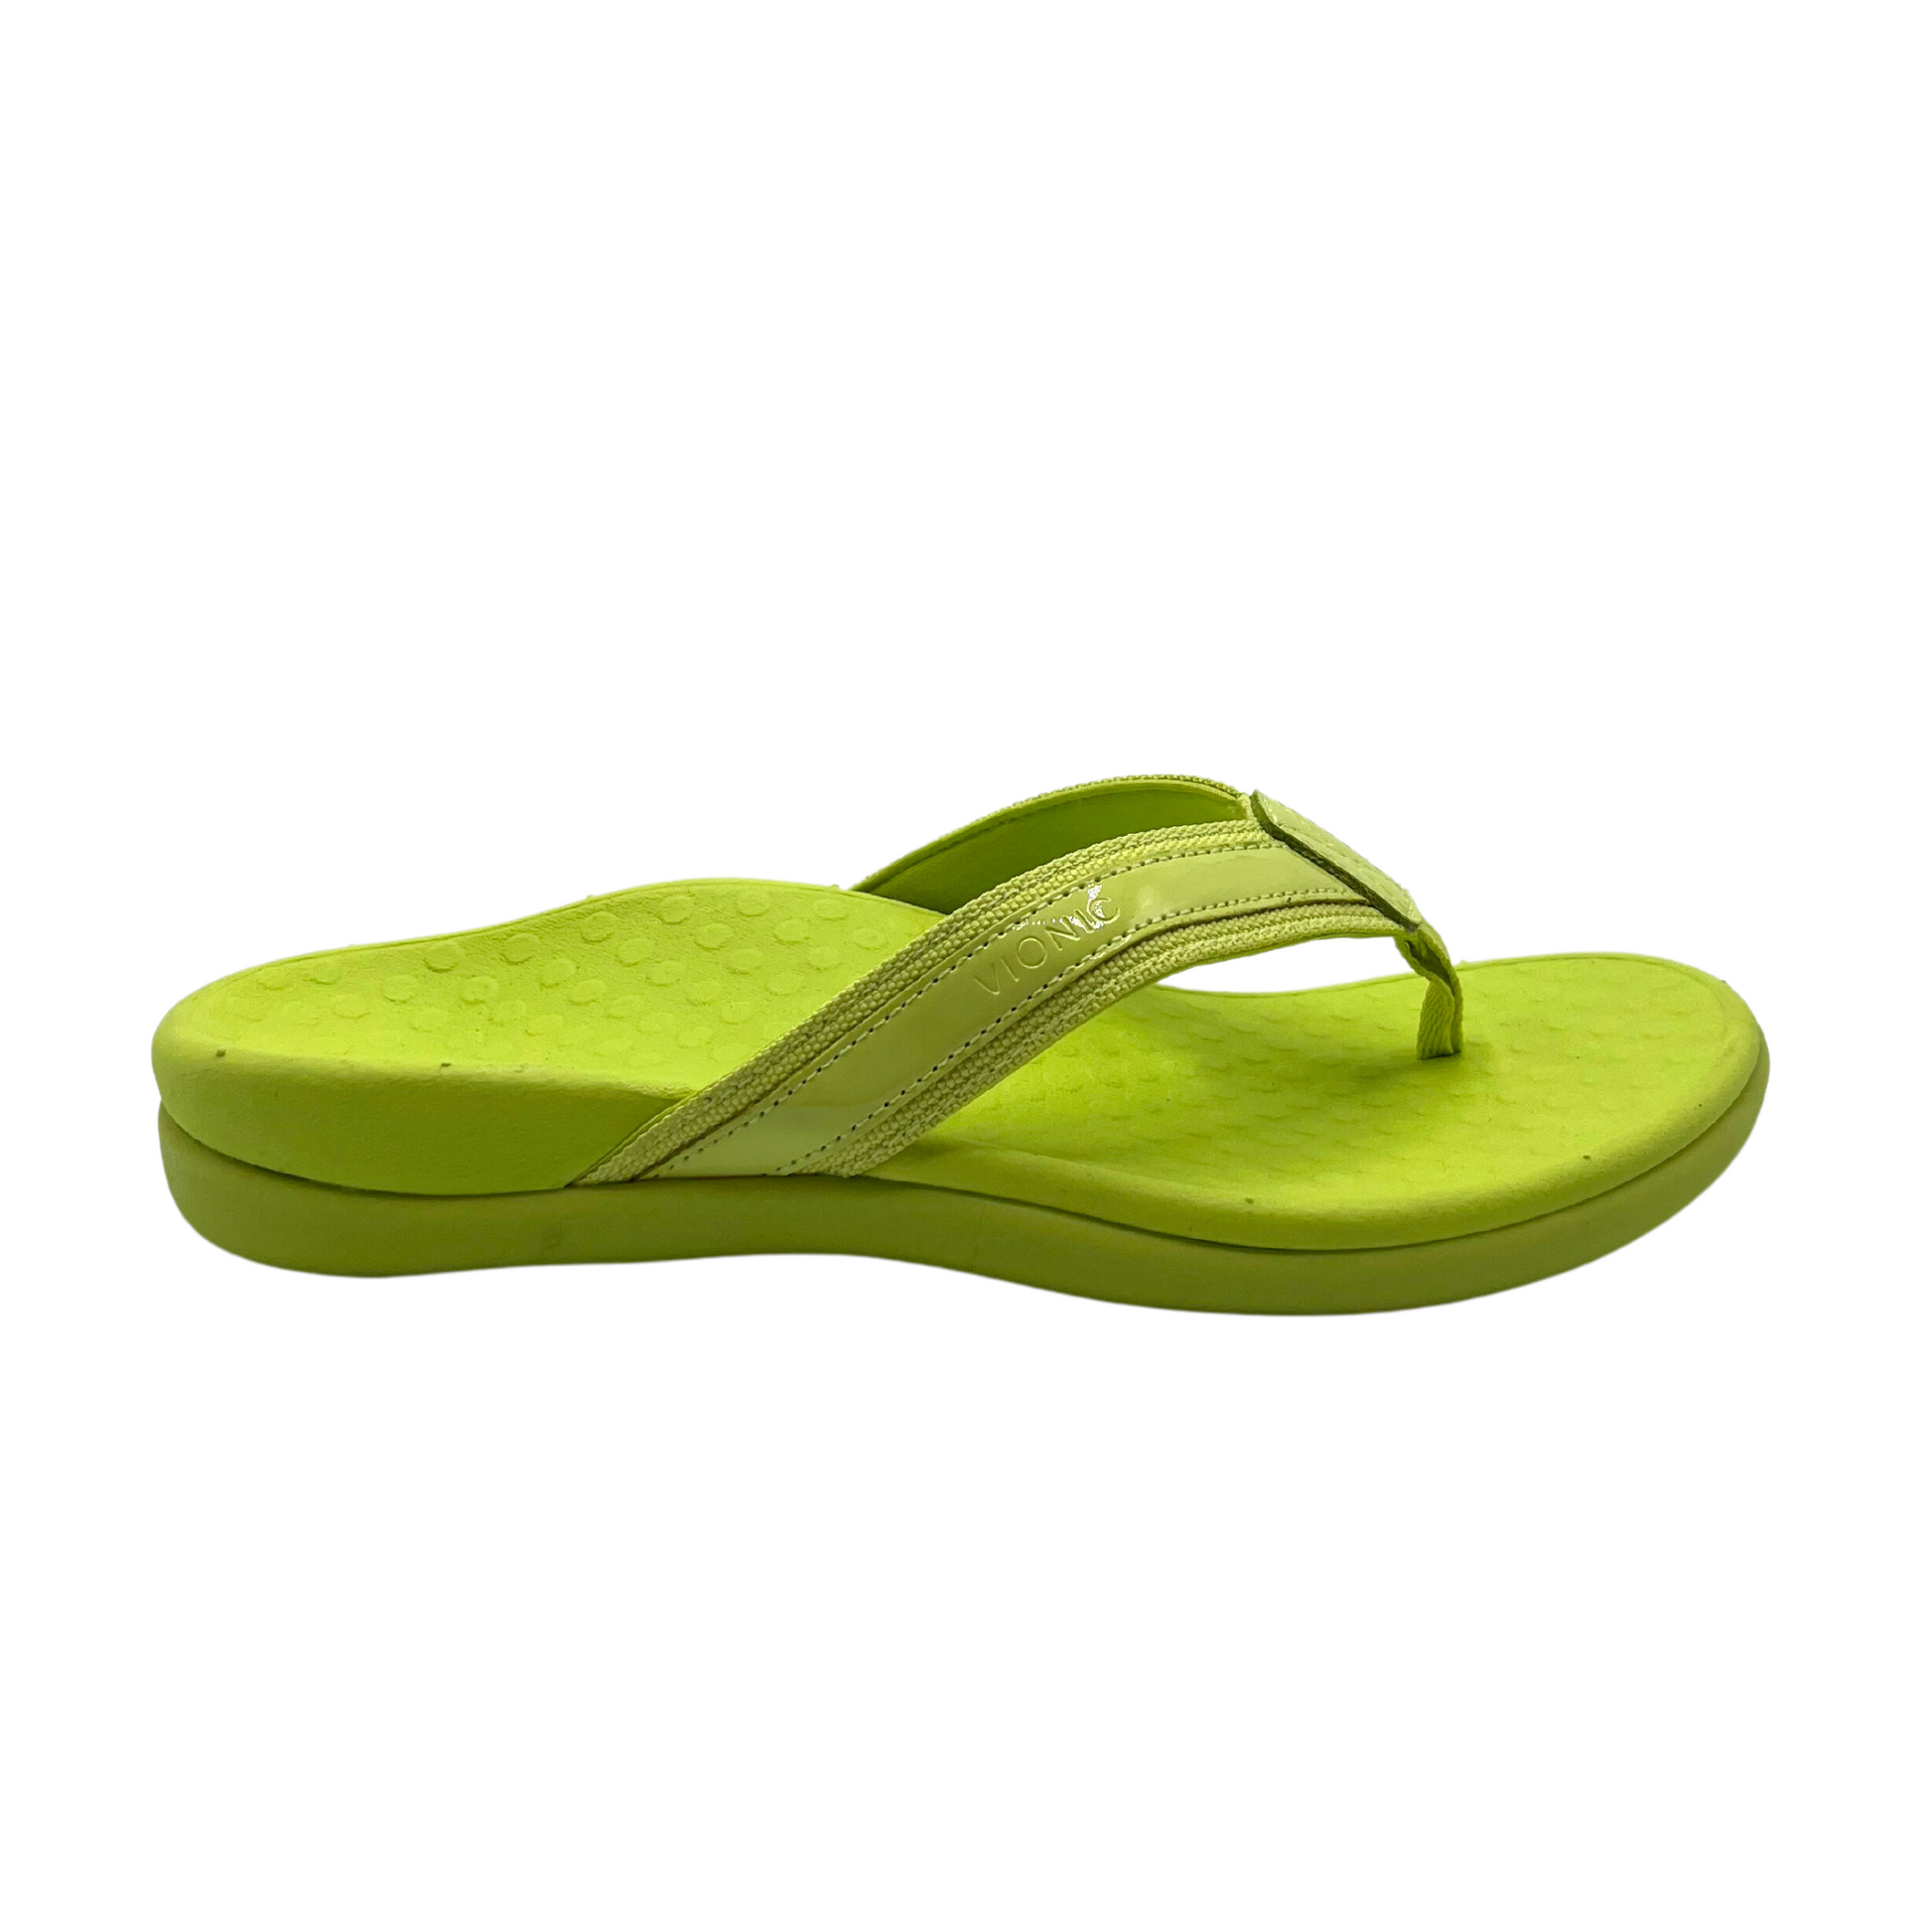 Outside view of a toe post sandal shown in a bright green.  Nice wide straps around the foot for stability.